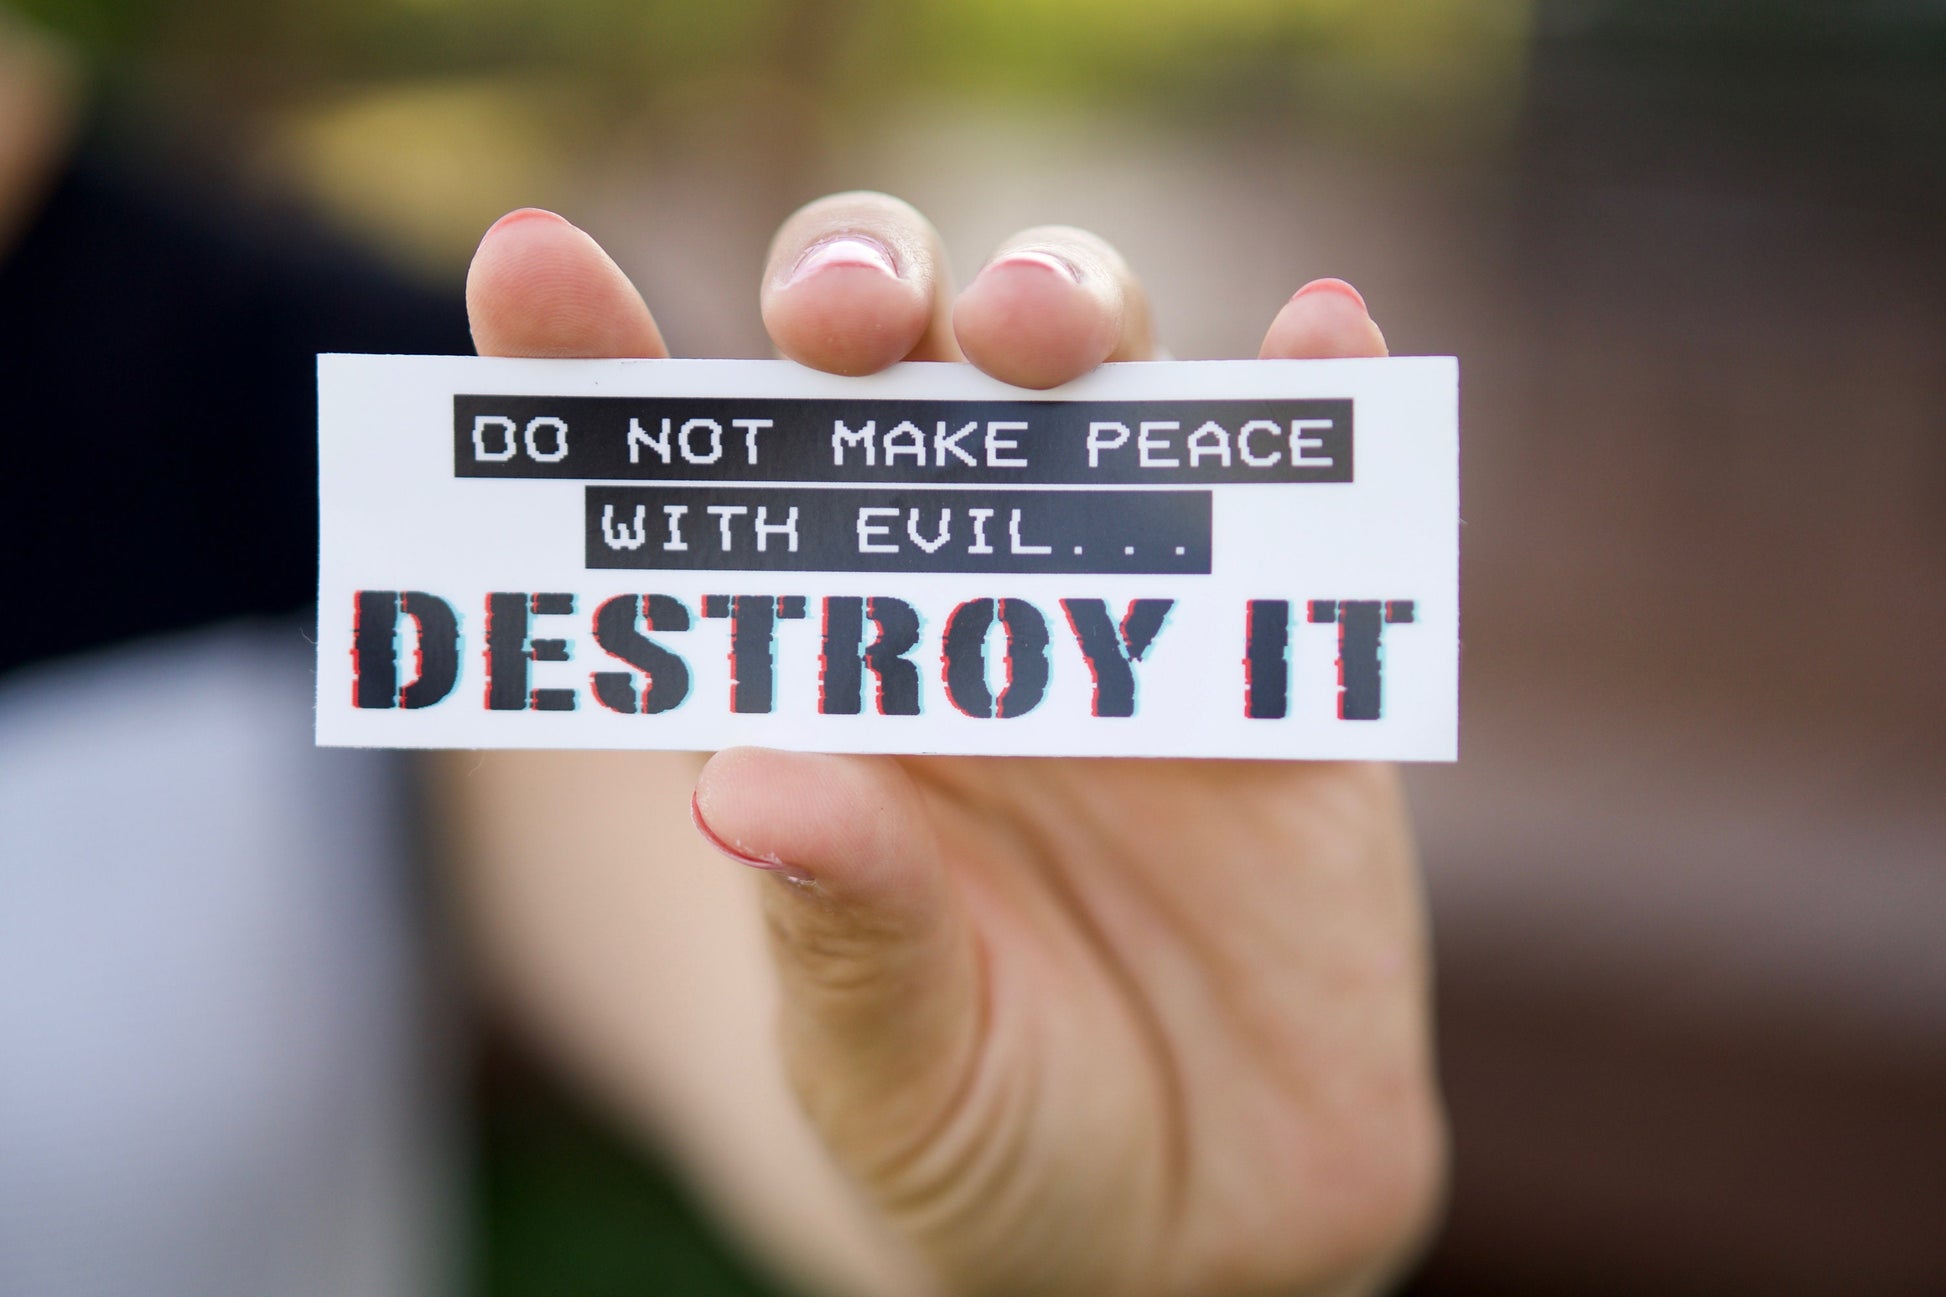 A powerful reminder to stand against evil with this 4.5" x 1.5" vinyl sticker that is waterproof, dishwasher, and microwave safe, removing without leaving a residue. Perfect for your car or laptop, let this "Do Not Make Peace With Evil, DESTROY IT" sticker inspire you to join St. Maximillian Kolbe's Militia of the Immaculata in spreading faith and combating evil.